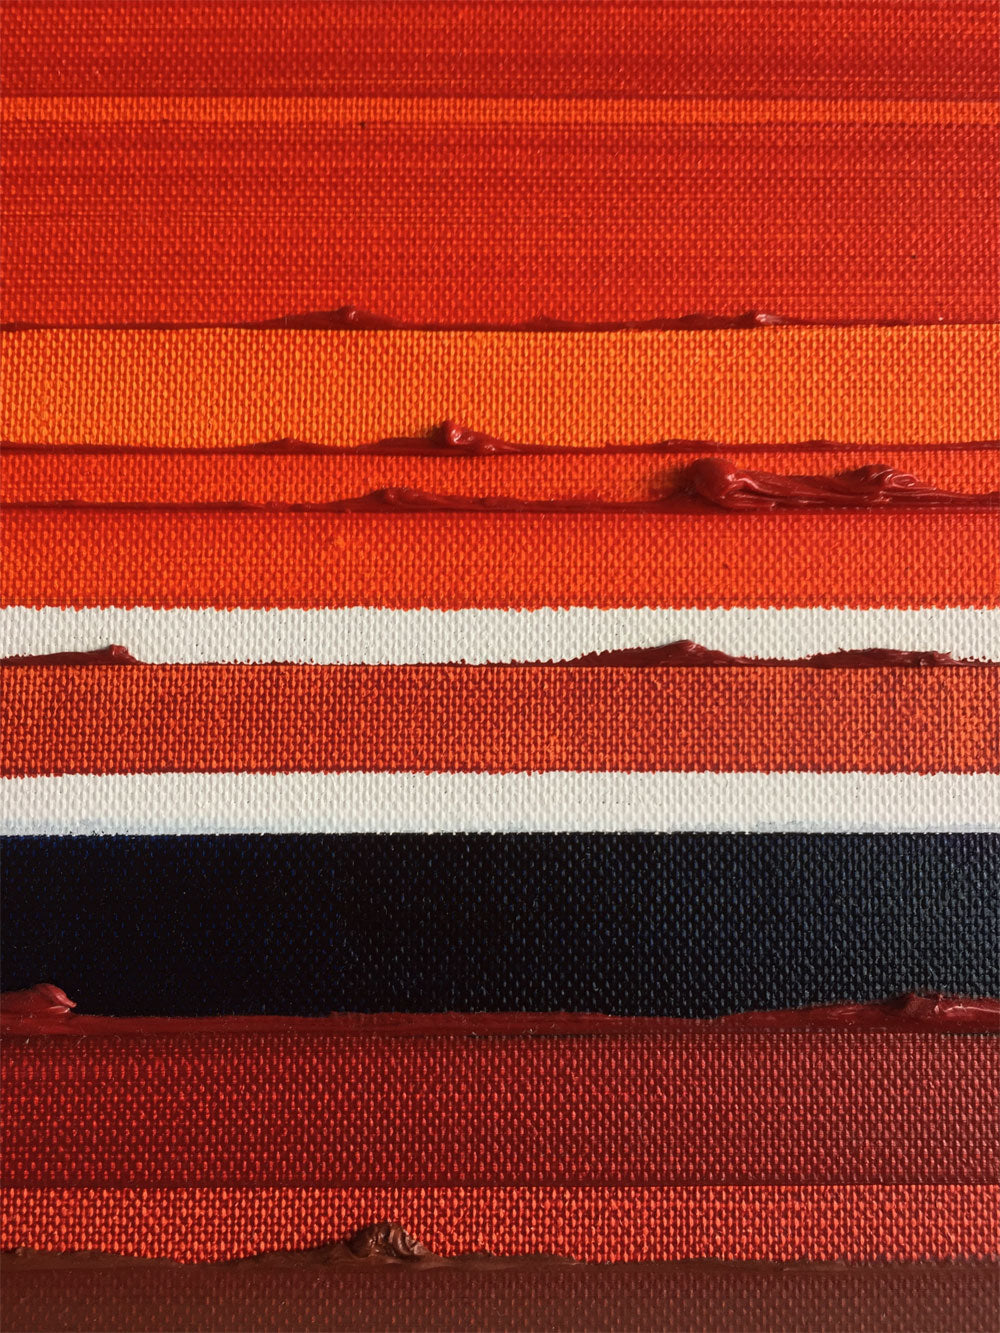 Stripes Orange Oil Painting by Rose Long